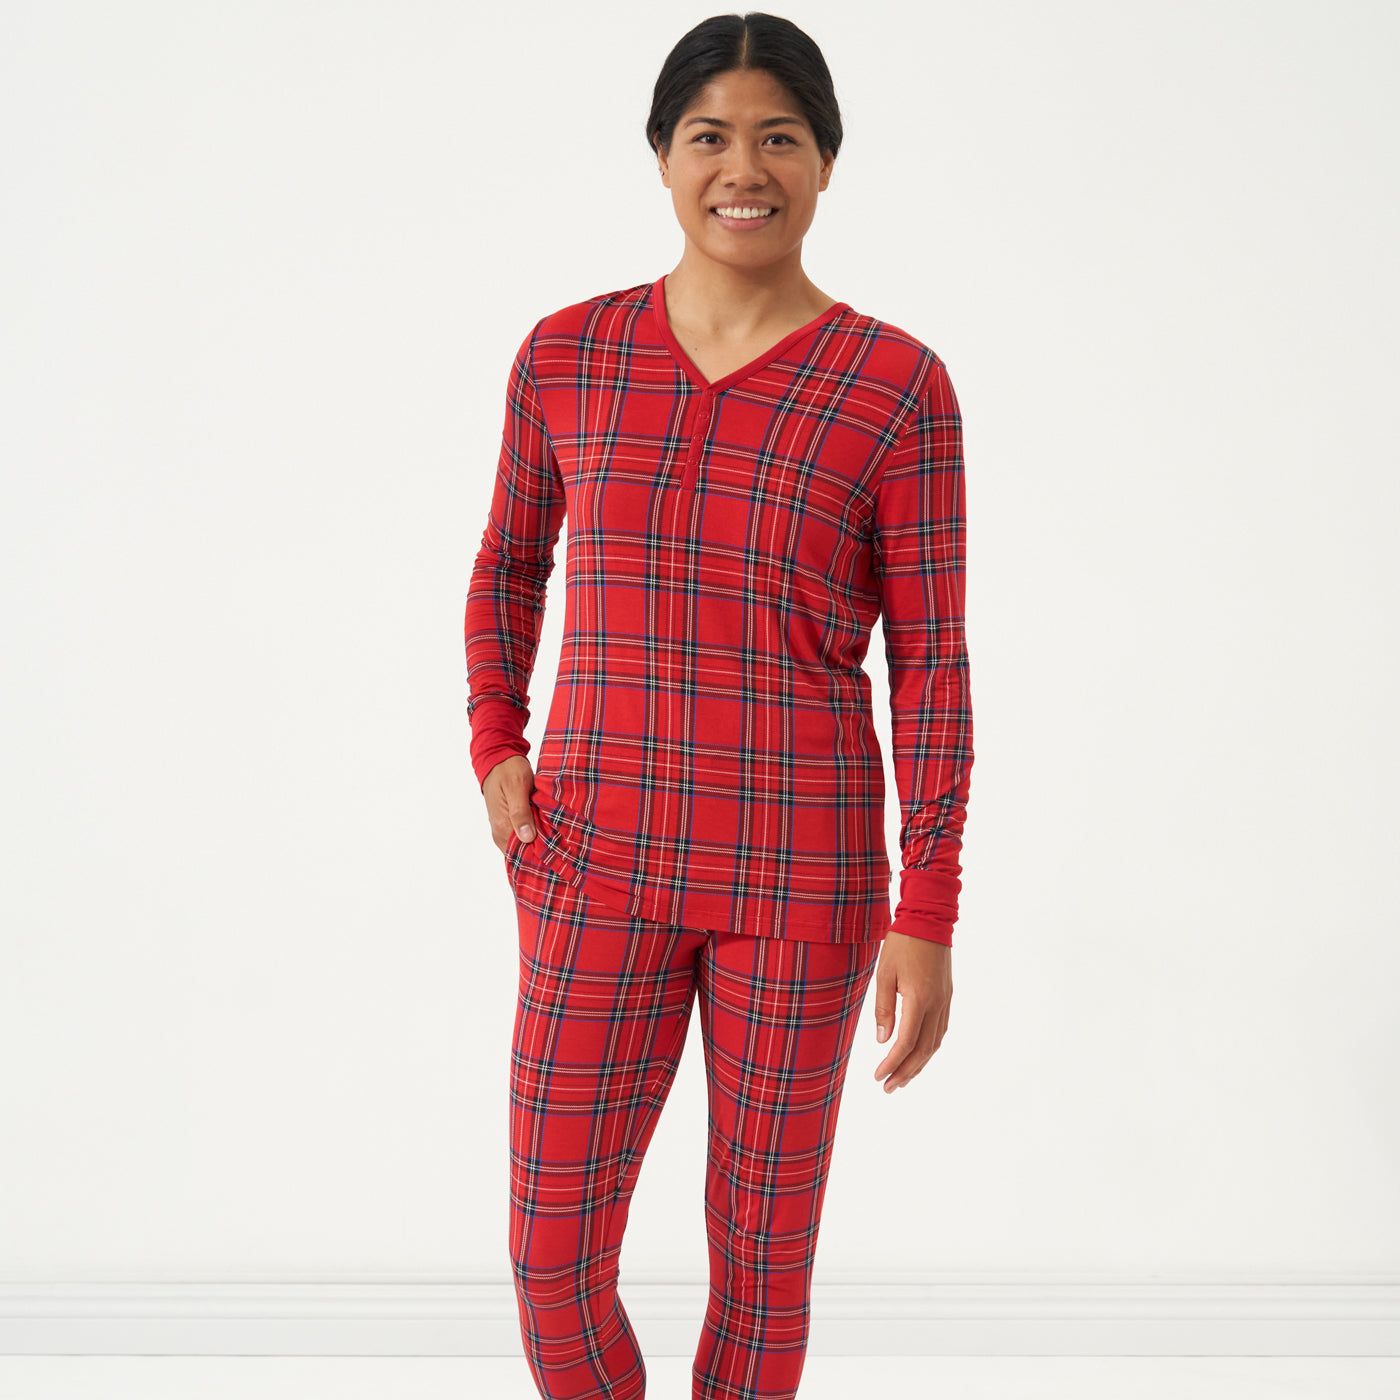 Woman wearing a Holiday Plaid women's pajama top and matching pants